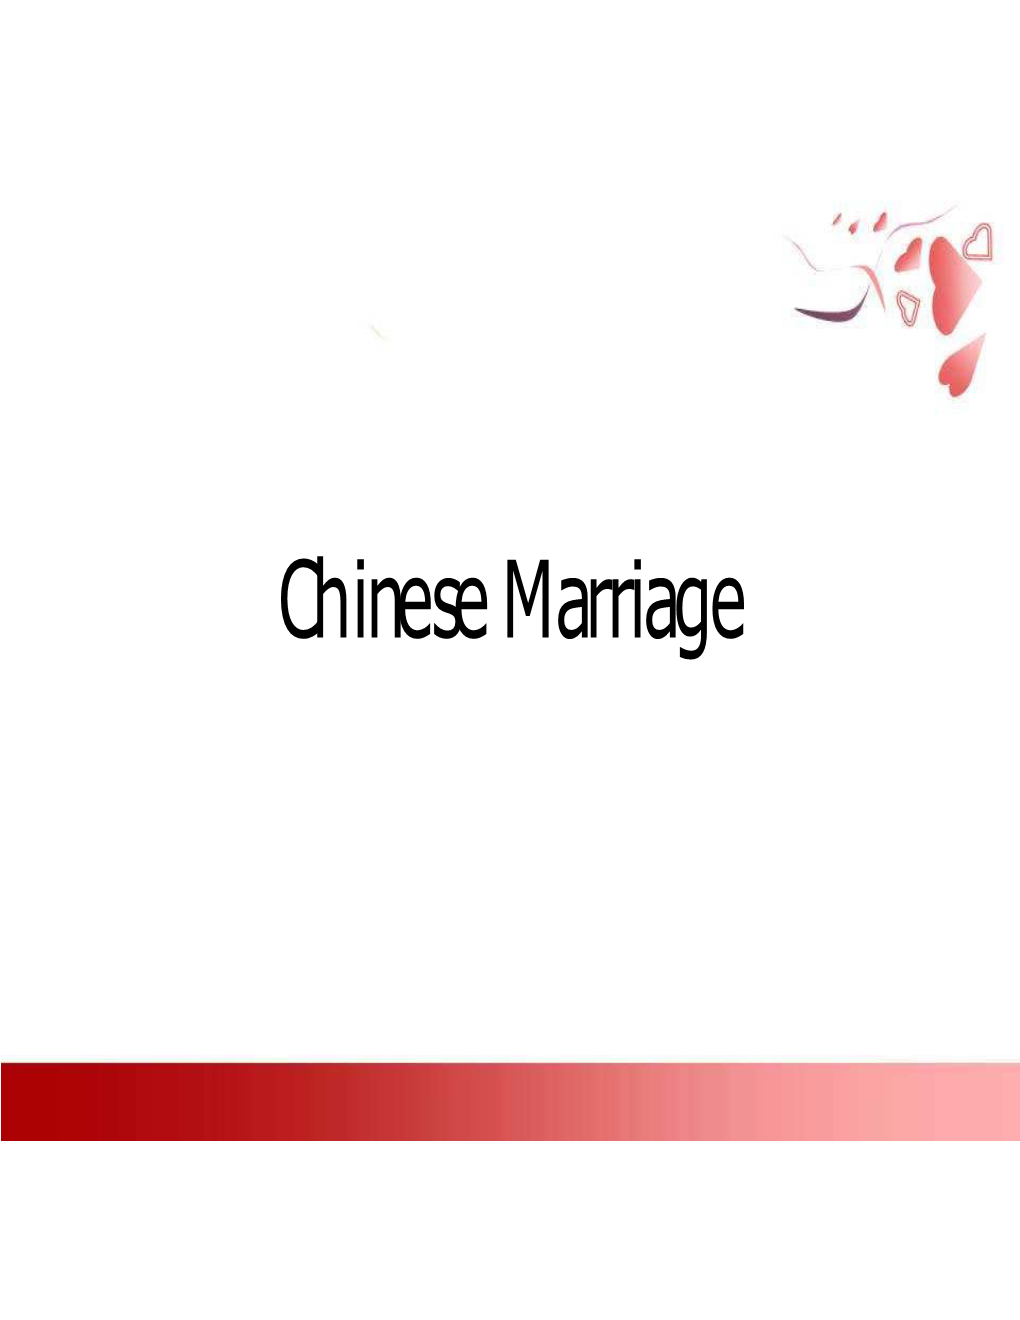 Chinese Marriage • Since Ancient Times , Marriage Has Been Regarded As One of the Three Most Blessed Events in the Life of a Chinese Person